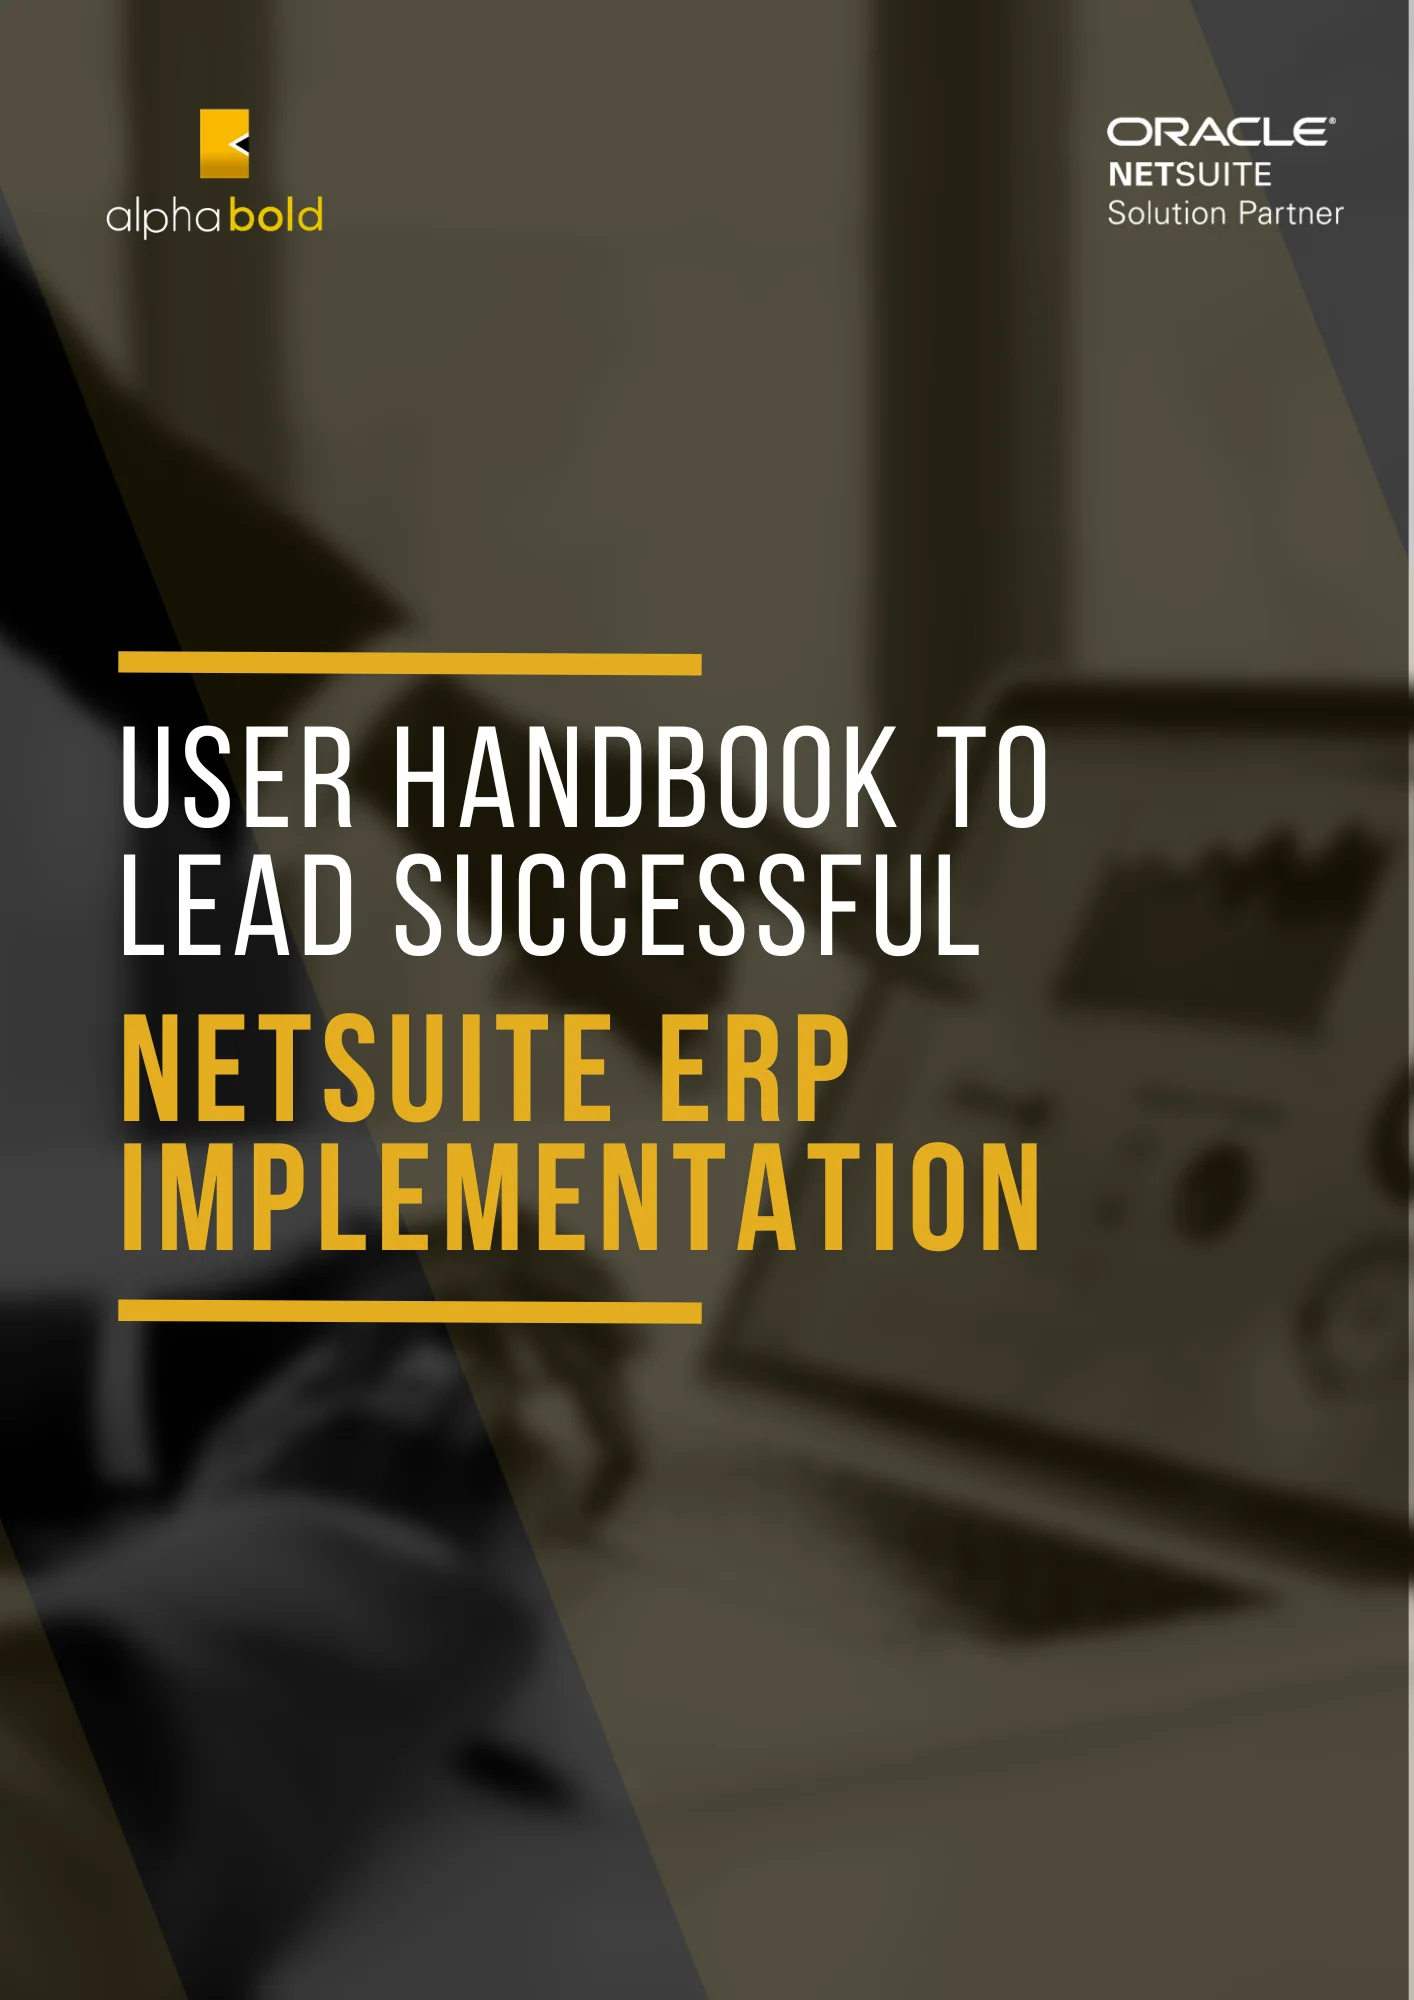 this image show's the Lead Gateway: User Handbook to Lead Successful NetSuite ERP Implementation